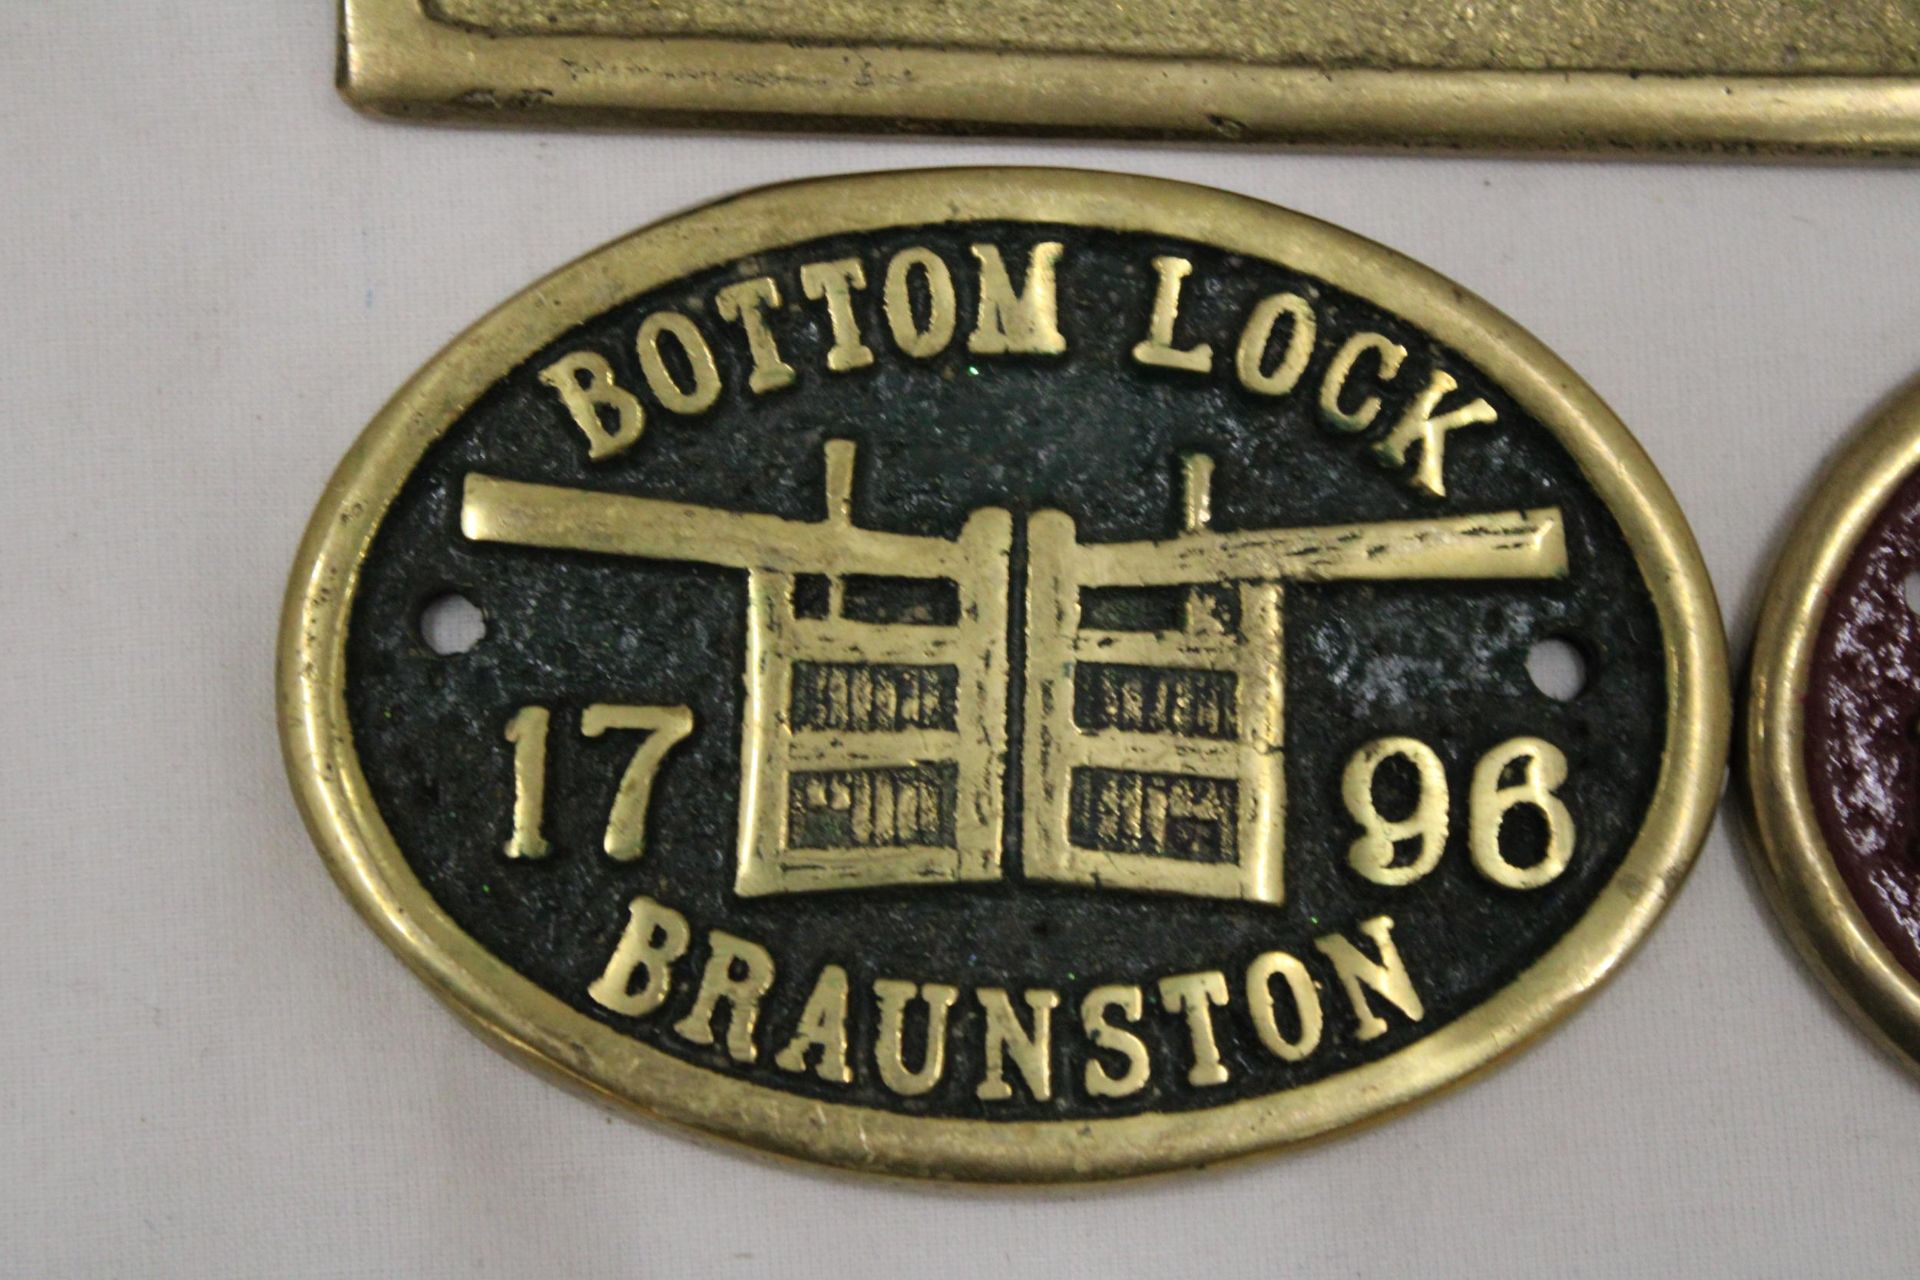 THREE BRASS SIGNS TO INCLUDE, RESTAURANT, BOTTOM LOCK, BRAUNSTON AND BRAUNSTON TUNNEL - Image 3 of 5